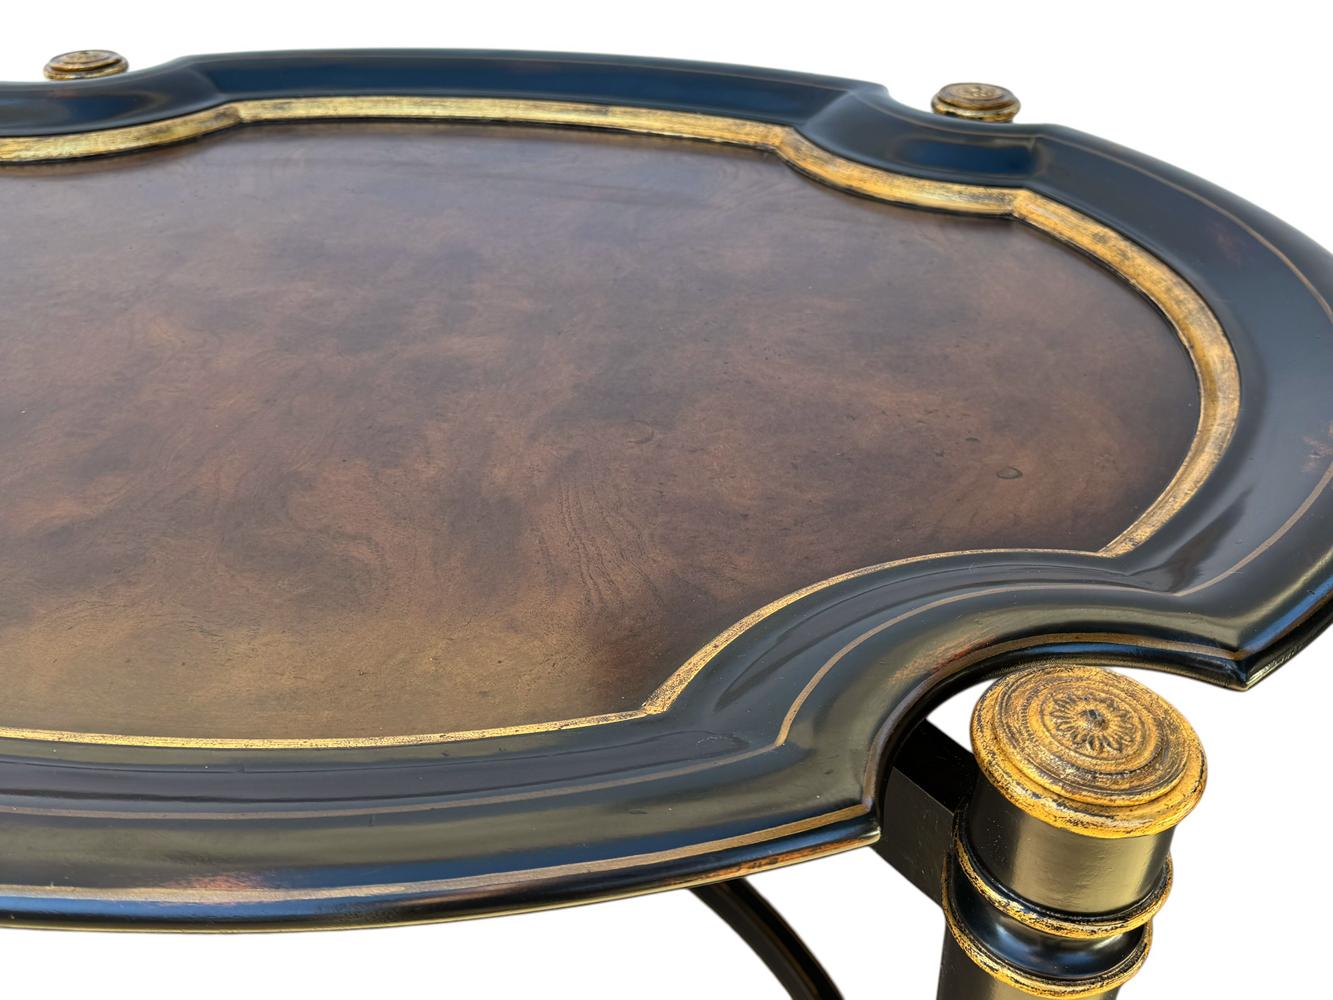 Hollywood Regency Burl Wood with Gold Trim Oval Cocktail Table by Maitland Smith For Sale 2